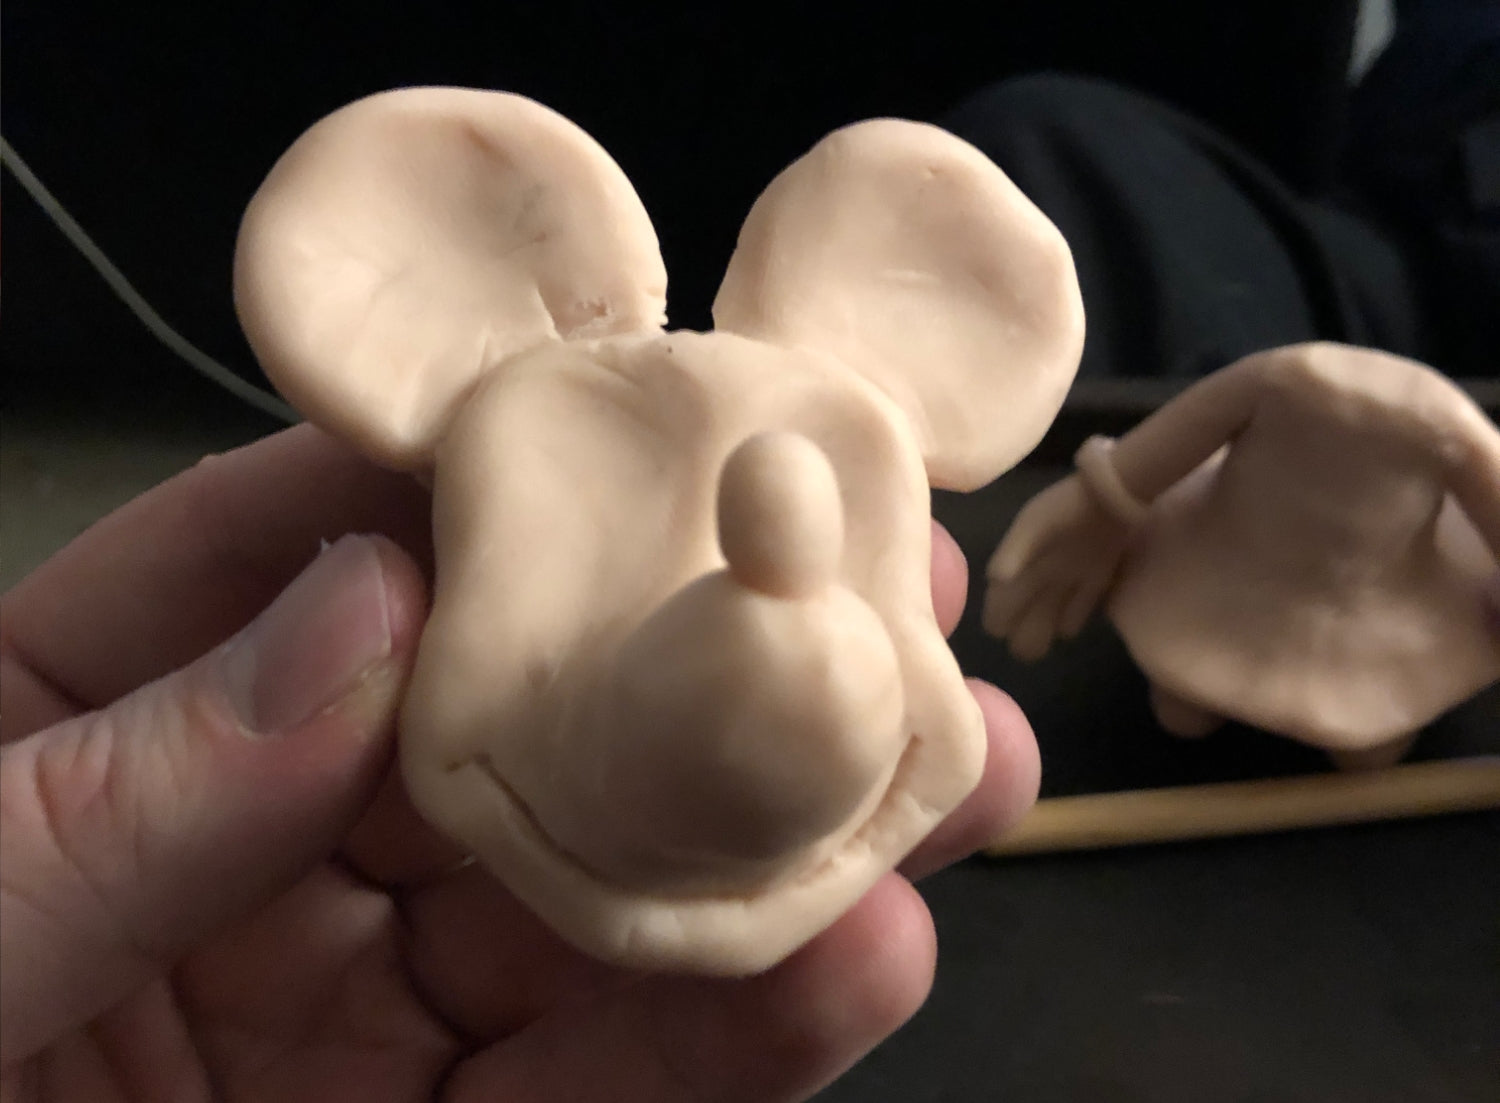 Minnie mouse head after nose and ears were attached.